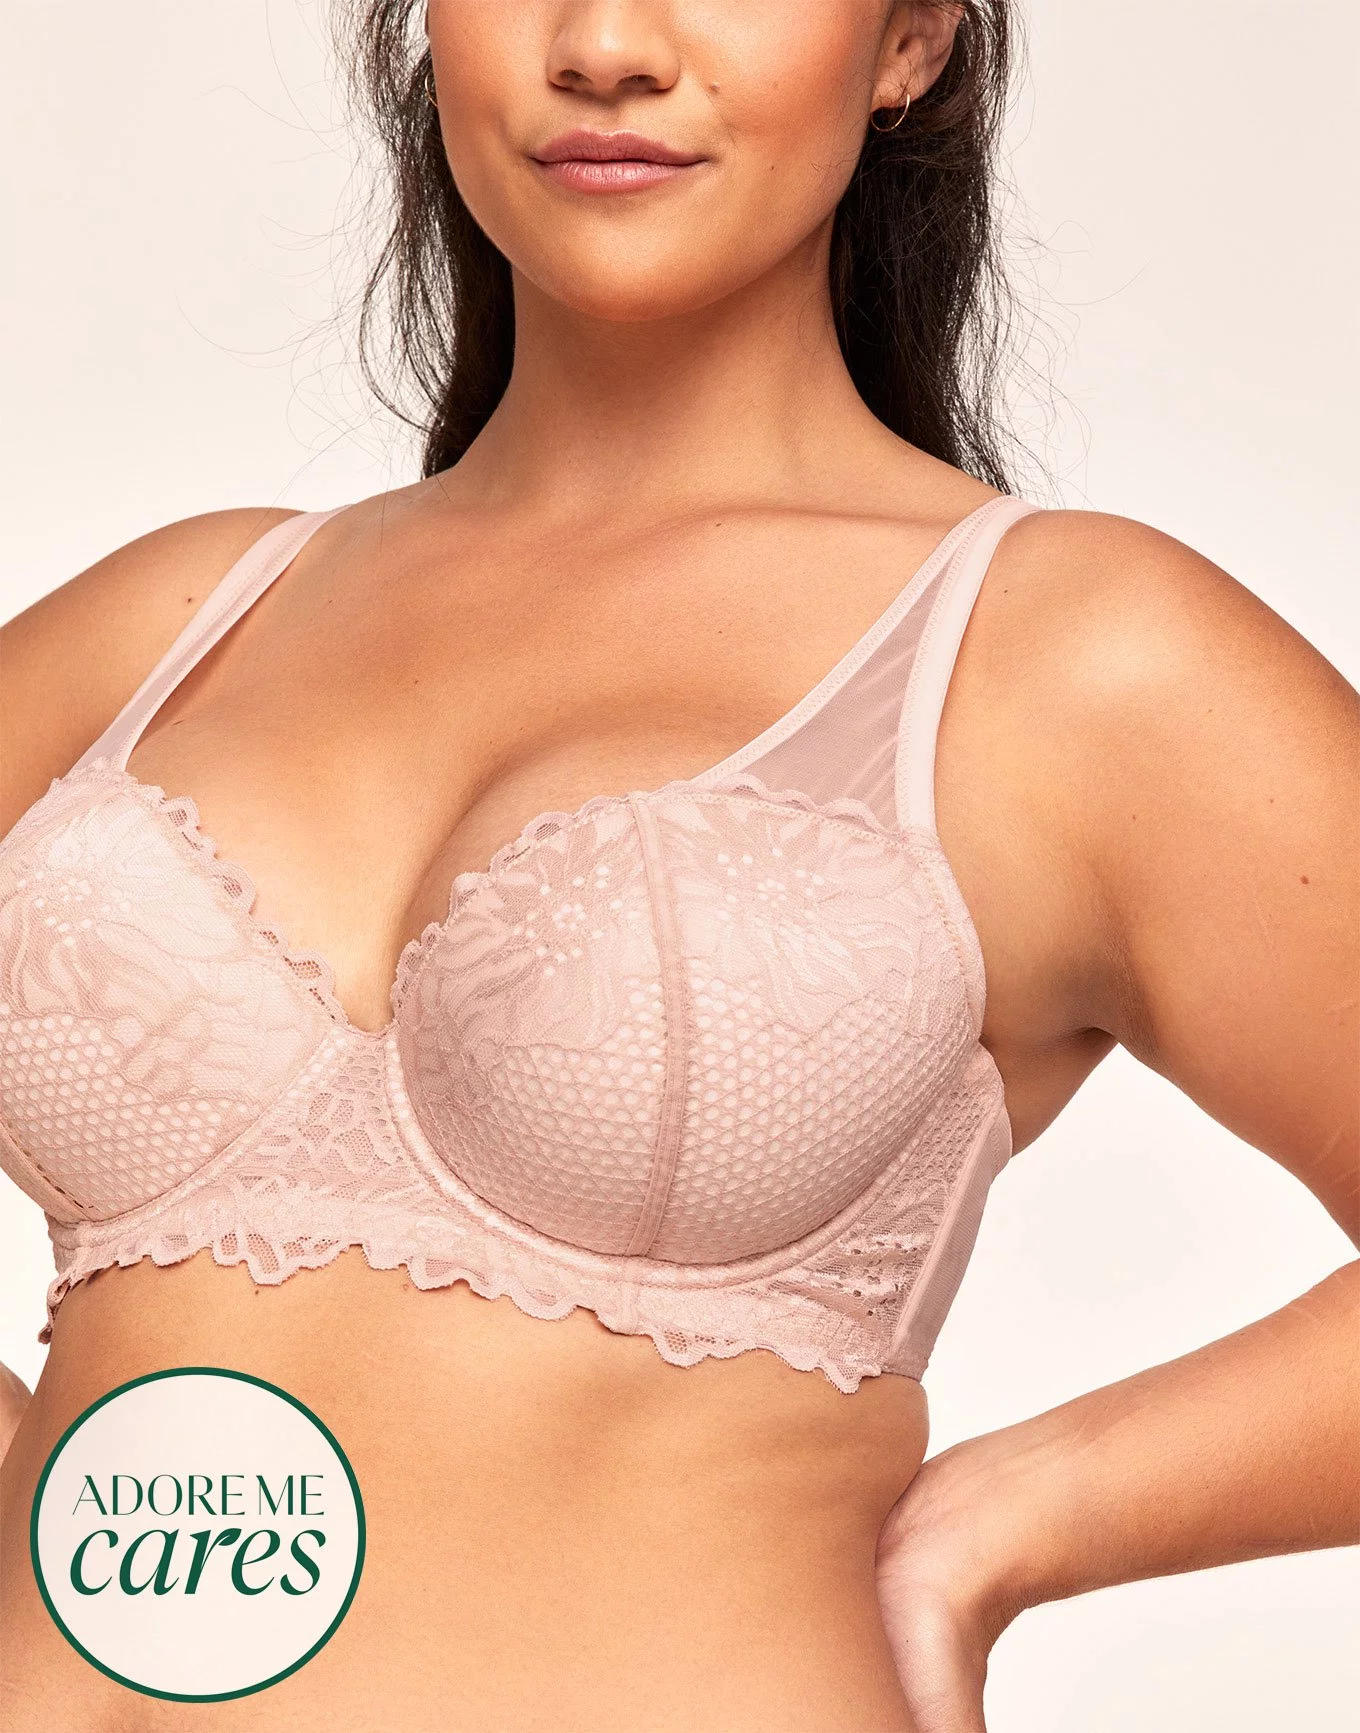 Adore Me Women's Analize Plunge Bra 36D / Tuscany Beige.